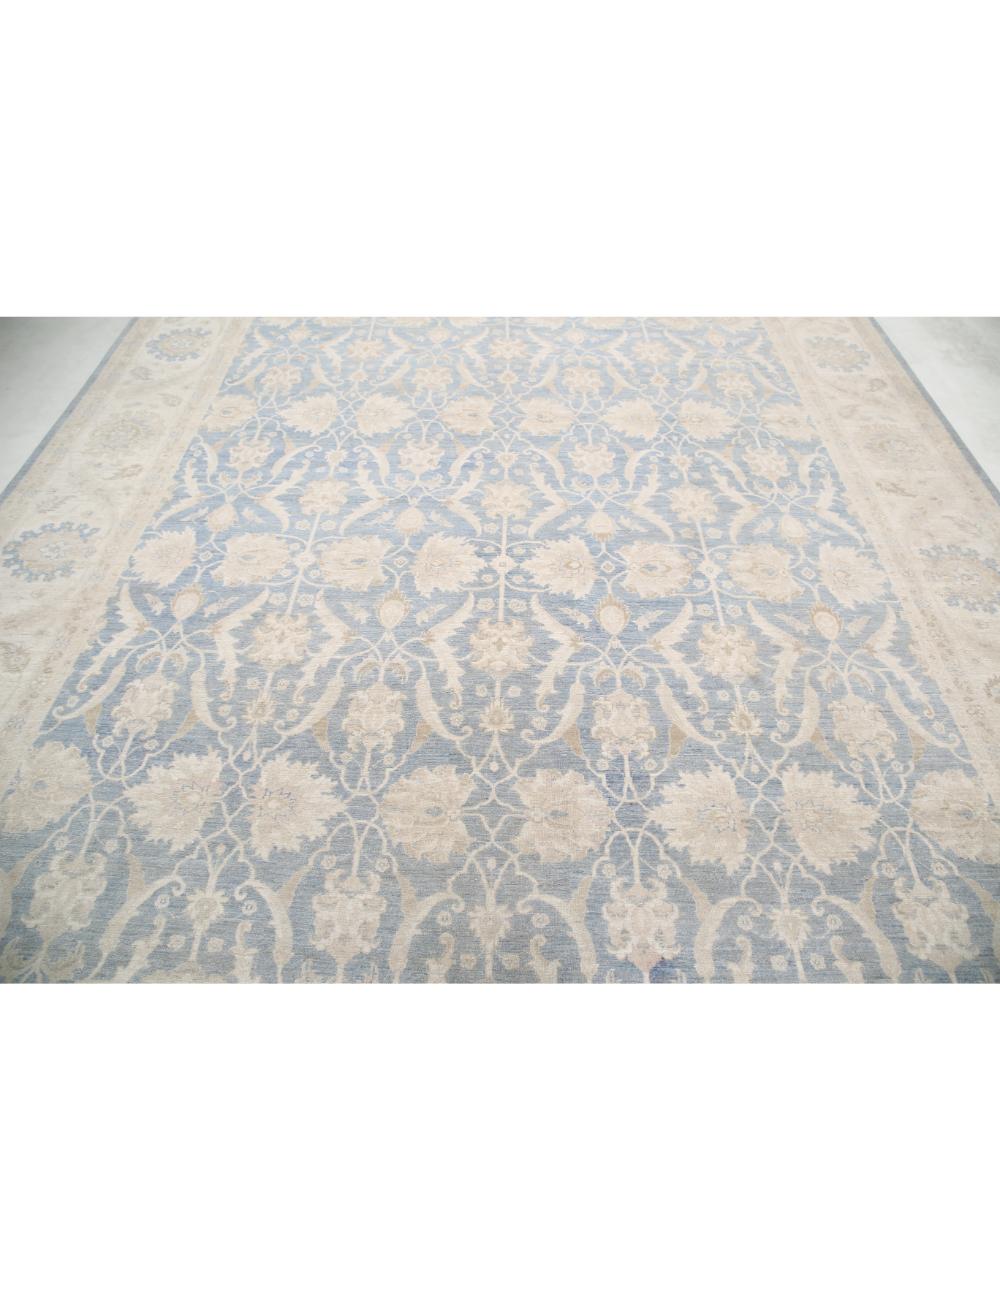 Serenity 9' 9" X 12' 5" Hand-Knotted Wool Rug 9' 9" X 12' 5" (297 X 378) / Blue / Ivory